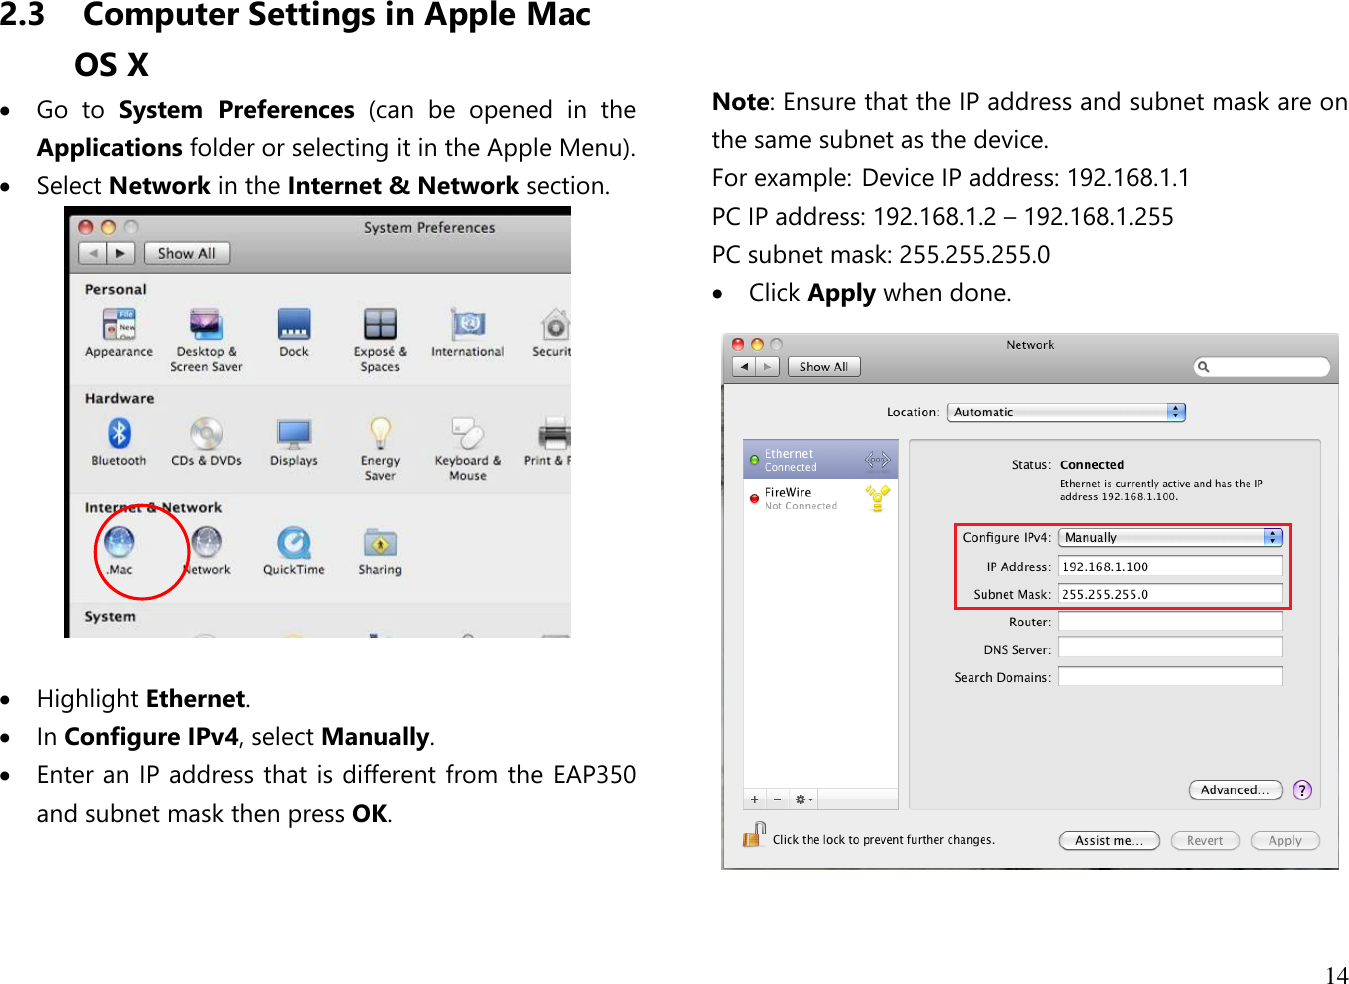  14  2.3  Computer Settings in Apple Mac OS X  Go  to  System  Preferences  (can  be  opened  in  the Applications folder or selecting it in the Apple Menu).  Select Network in the Internet &amp; Network section.    Highlight Ethernet.  In Configure IPv4, select Manually.  Enter an IP address that is different from the EAP350 and subnet mask then press OK.       Note: Ensure that the IP address and subnet mask are on the same subnet as the device.   For example:  Device IP address: 192.168.1.1 PC IP address: 192.168.1.2 – 192.168.1.255 PC subnet mask: 255.255.255.0  Click Apply when done.   